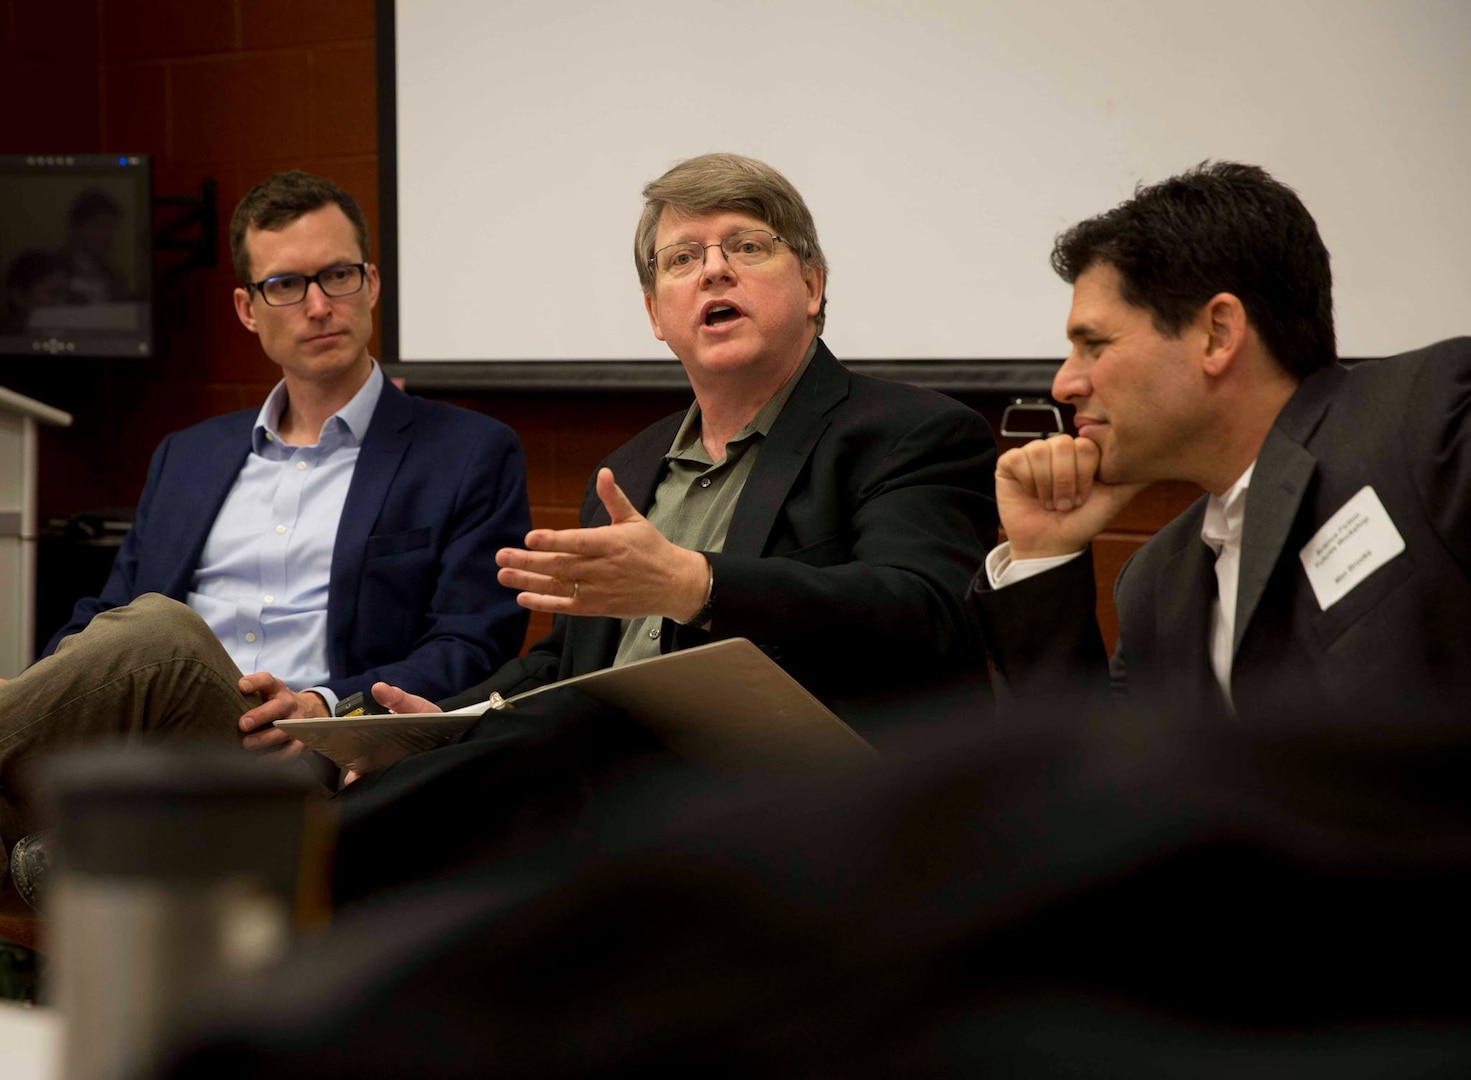 From left, August Cole, co-author of Ghost Fleet, Chuck Gannon, author of Trial by Fire, and Max Brooks, author of World War Z, talk with select group of burgeoning science fiction writers from across Department of Defense, February 4, 2019 (DOD/Kyle Olson)